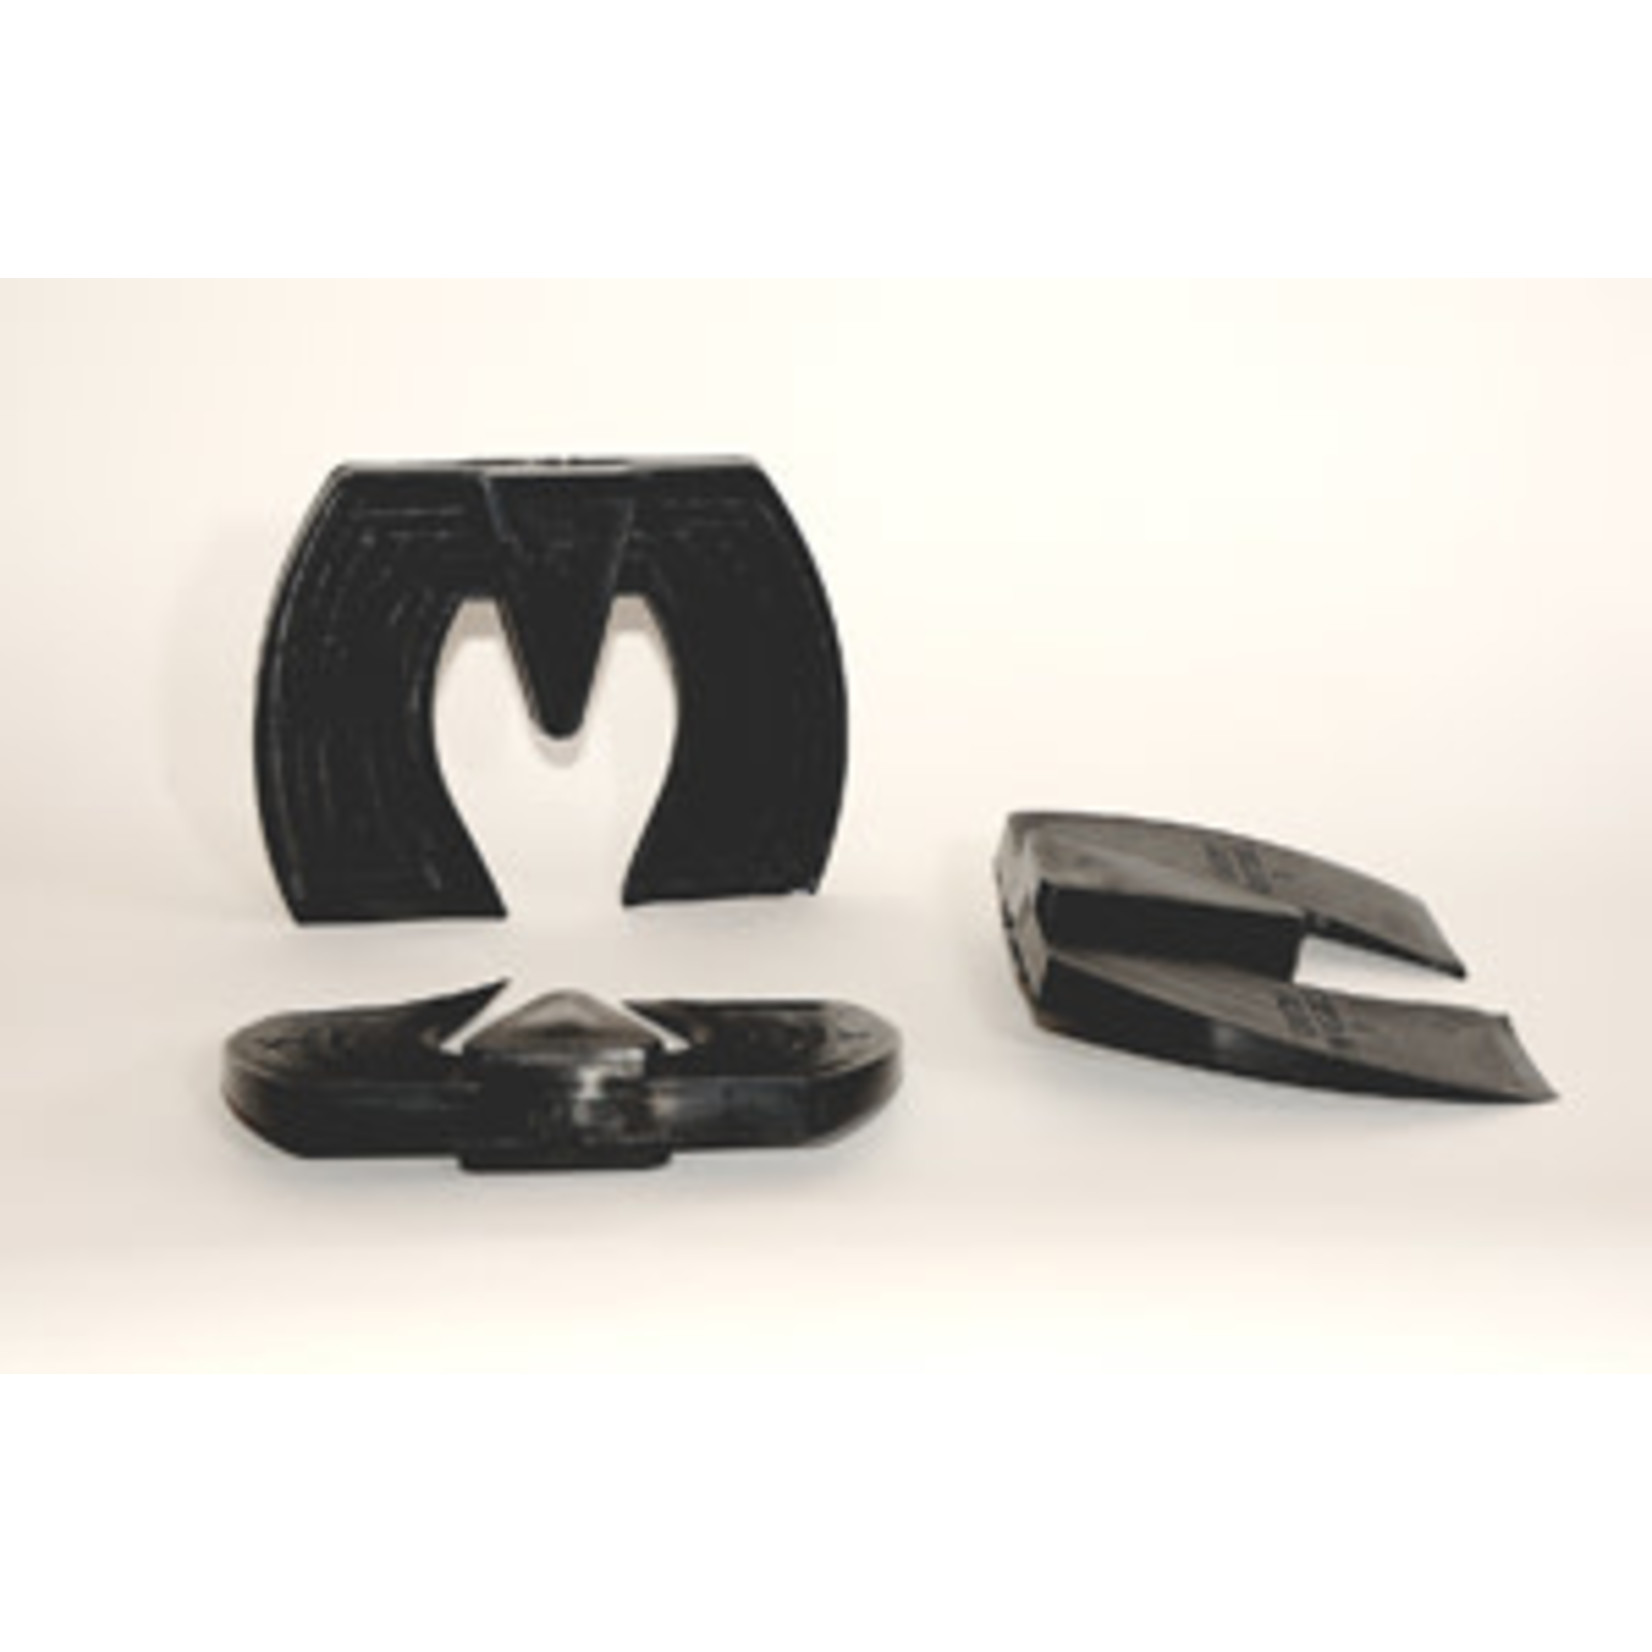 Castle Castle #3 Bar Wedge/ Frog Support Pad Pair